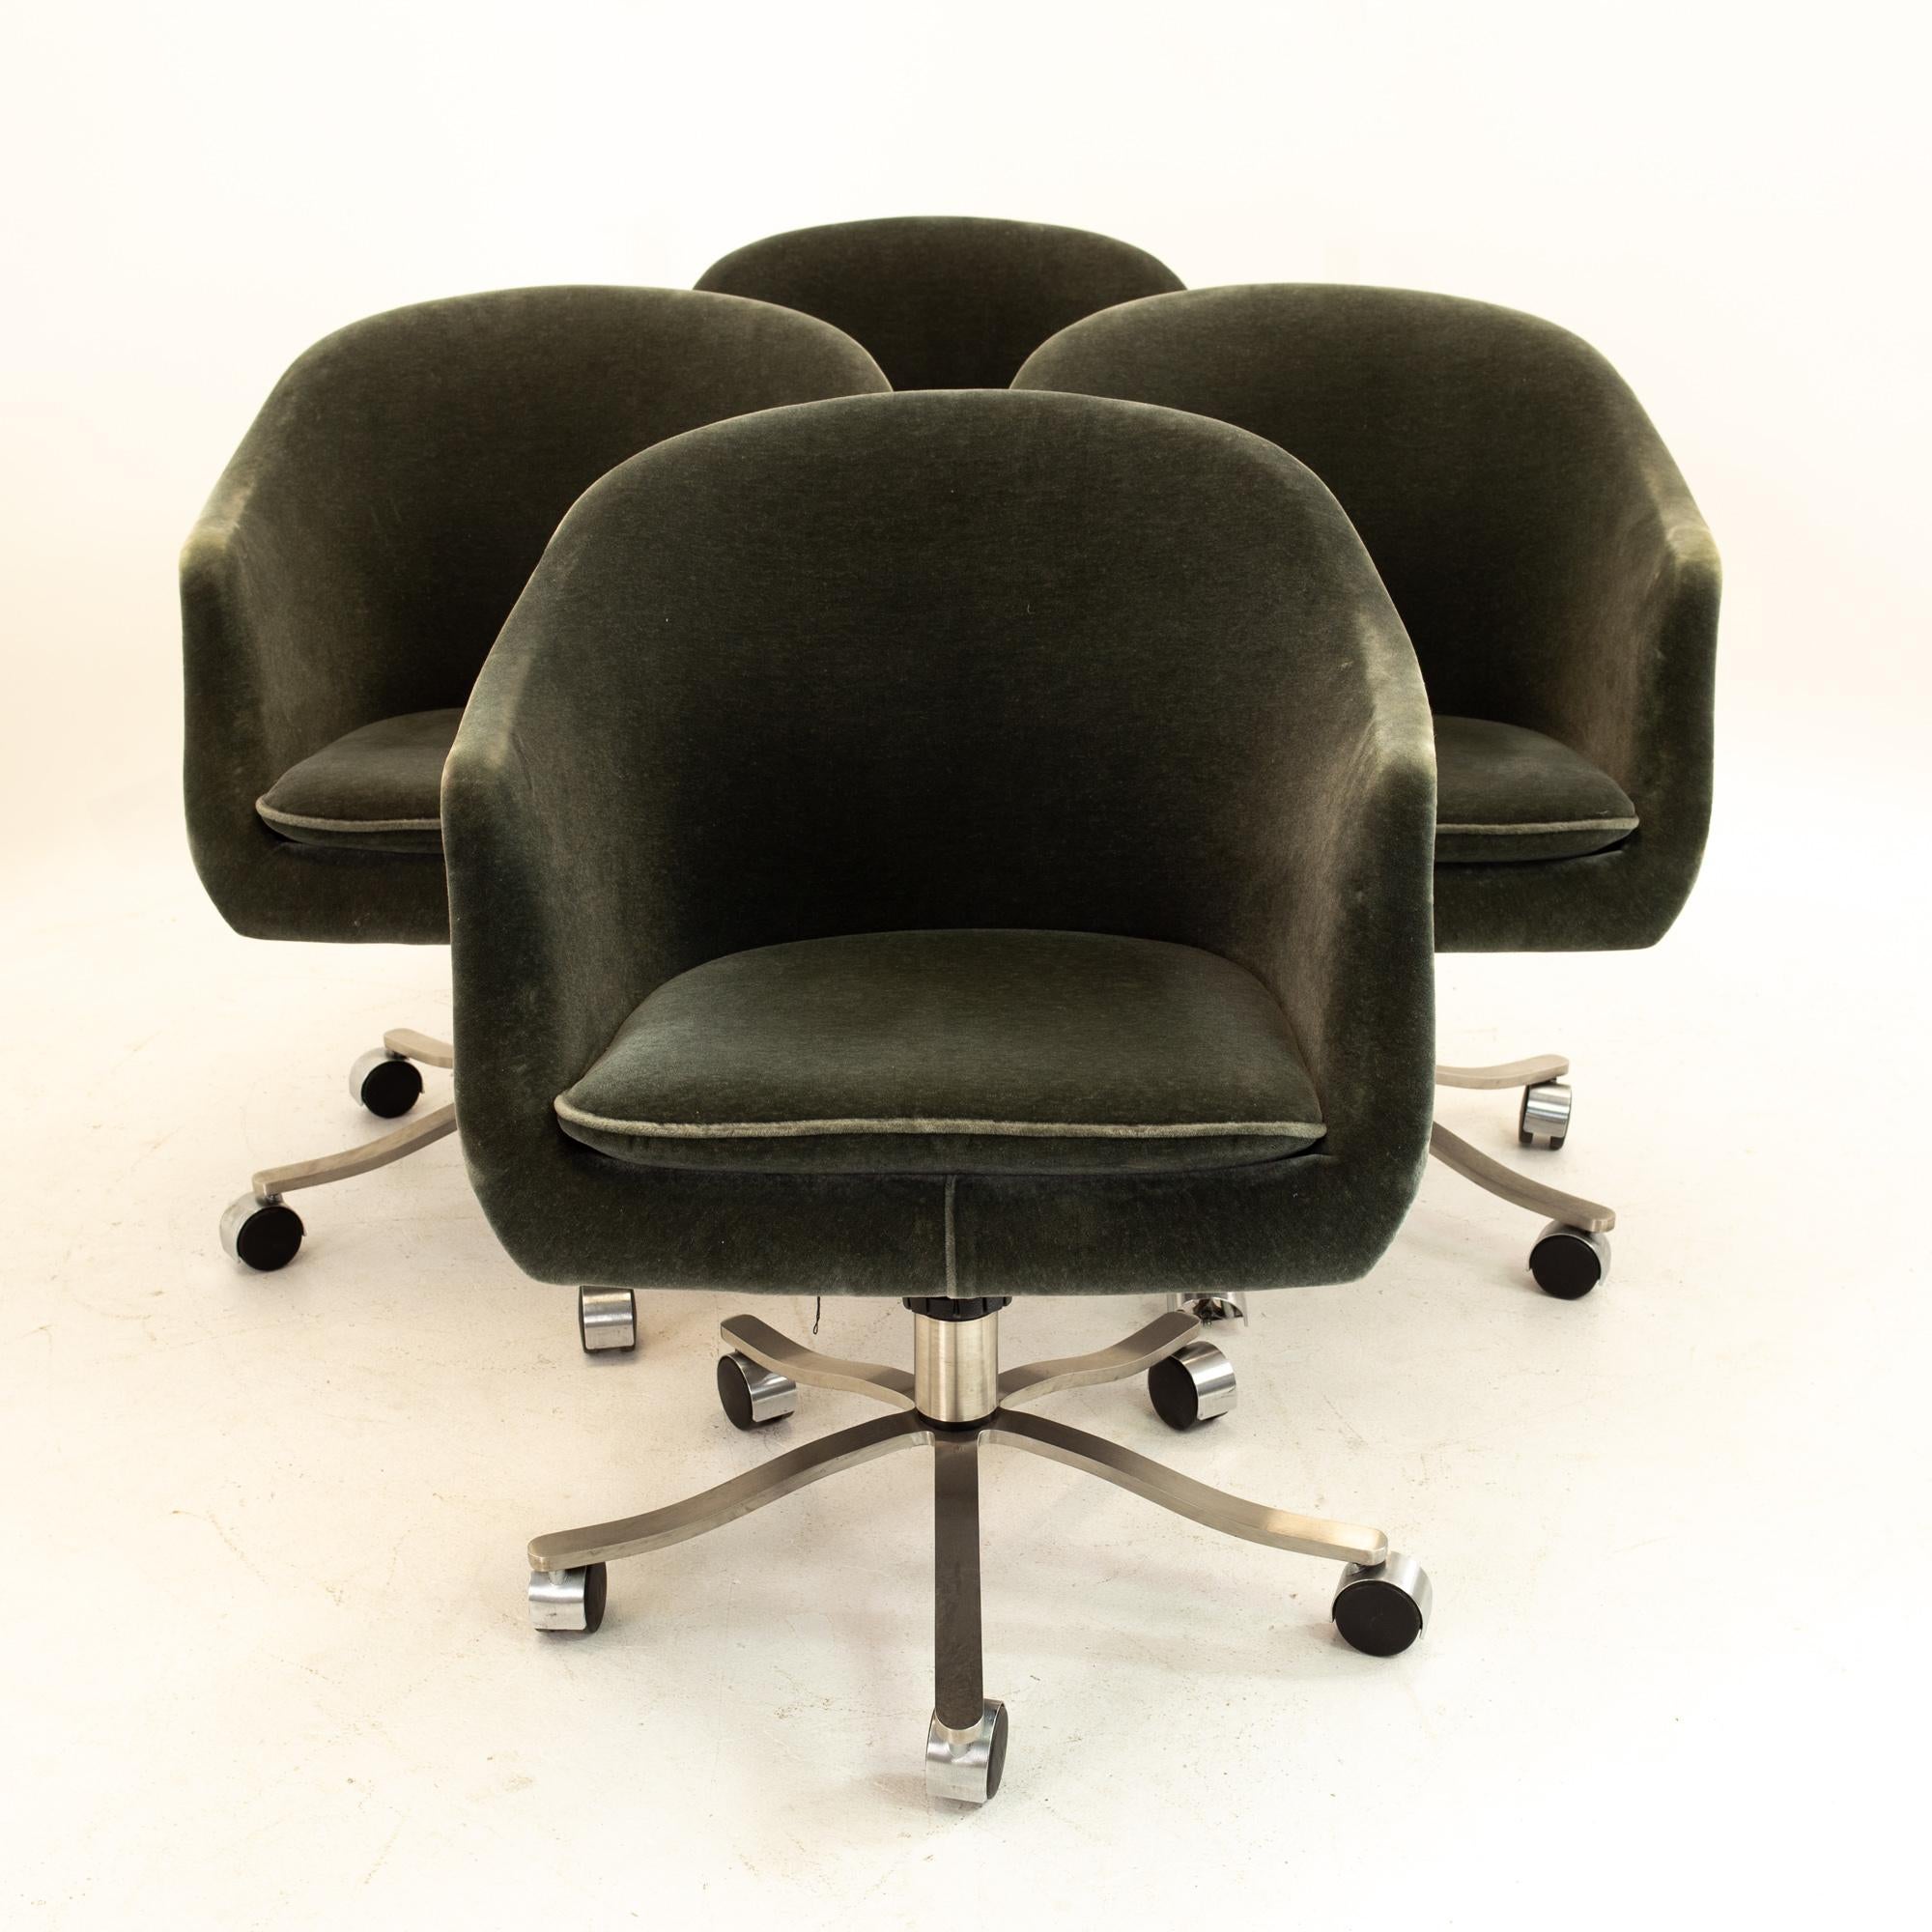 Signed Nicos Zographos Mohair Mid Century armchairs - Set of 4
Each chair measures: 26.25 wide x 26.5 deep x 32 high

All pieces of furniture can be had in what we call restored vintage condition. That means the piece is restored upon purchase so